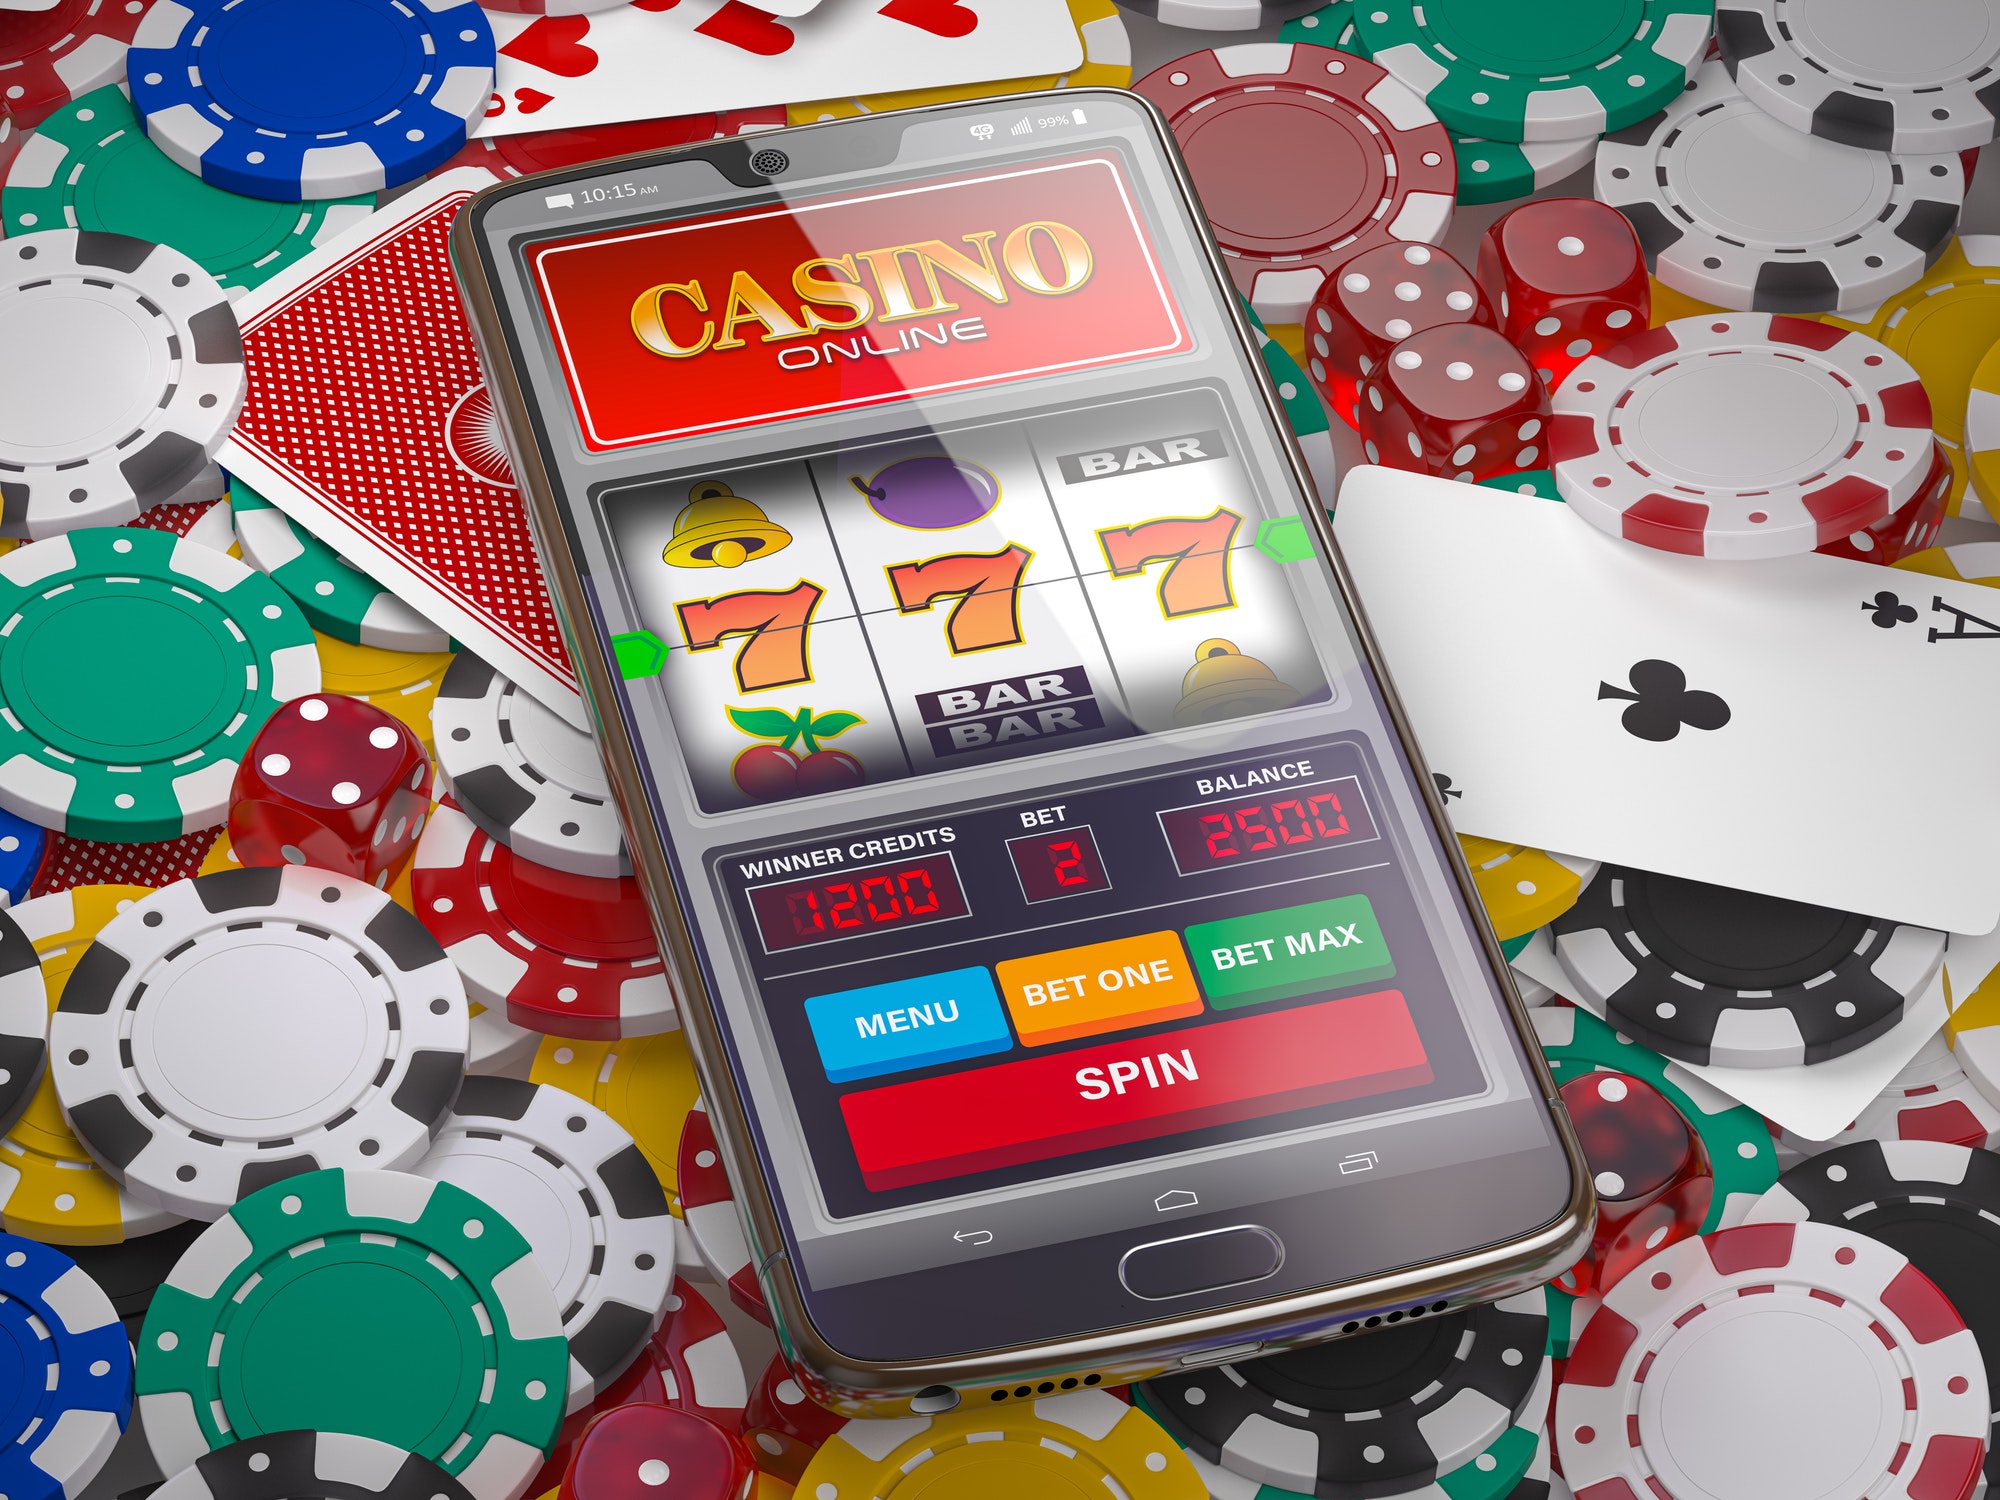 Online casino. Slot machine on smartphone screen, dice, casino chips and cards.